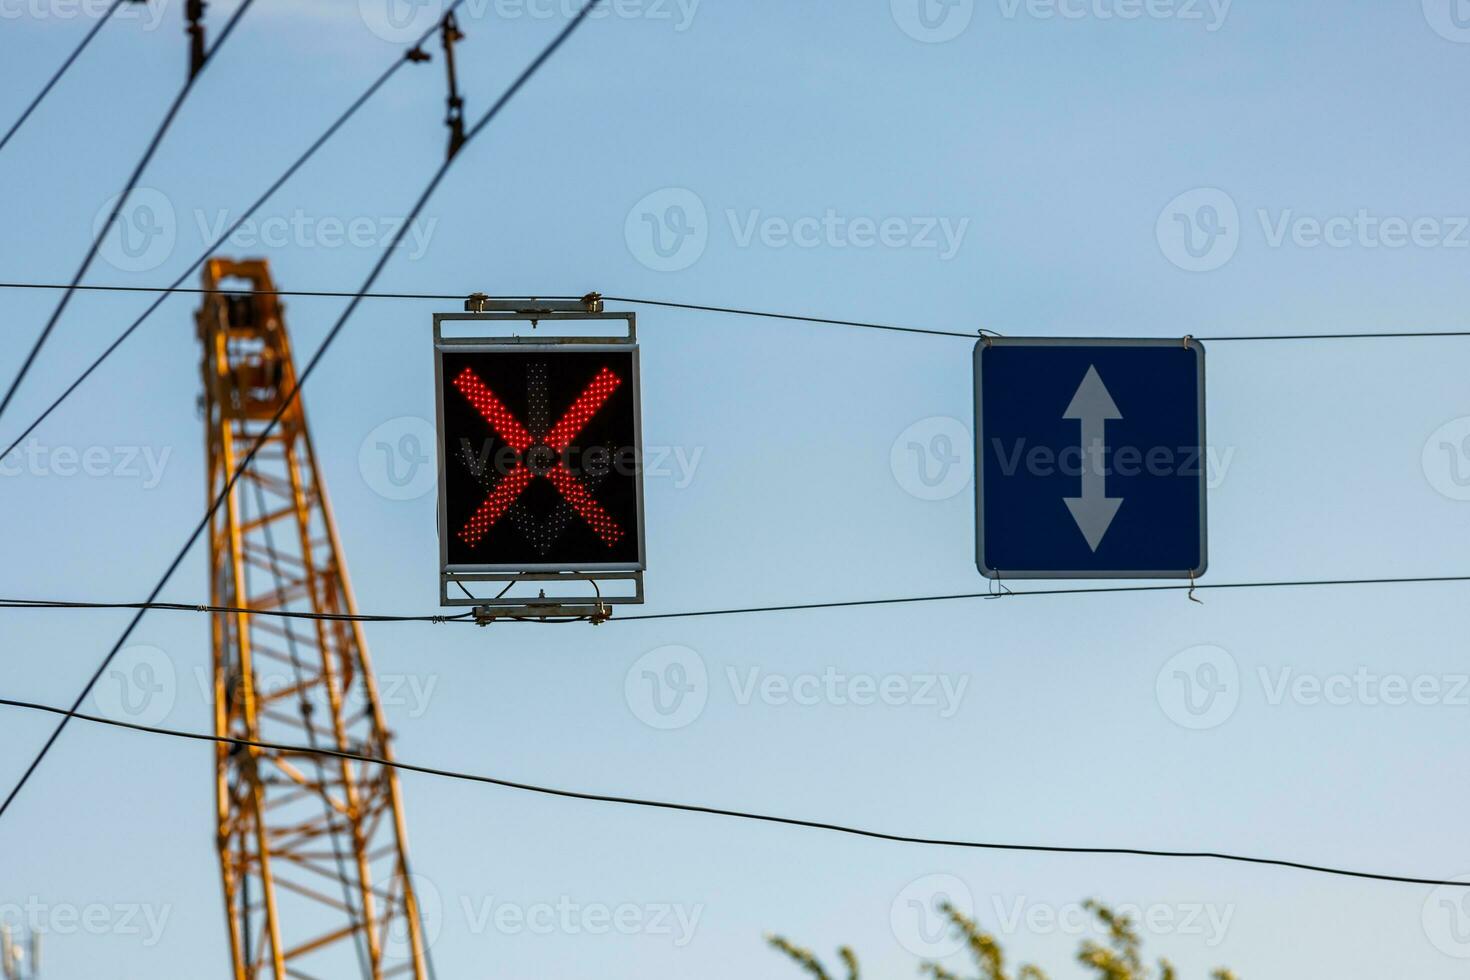 red X light and reversible lane sign above road wtih blurry yellow crane in the background photo